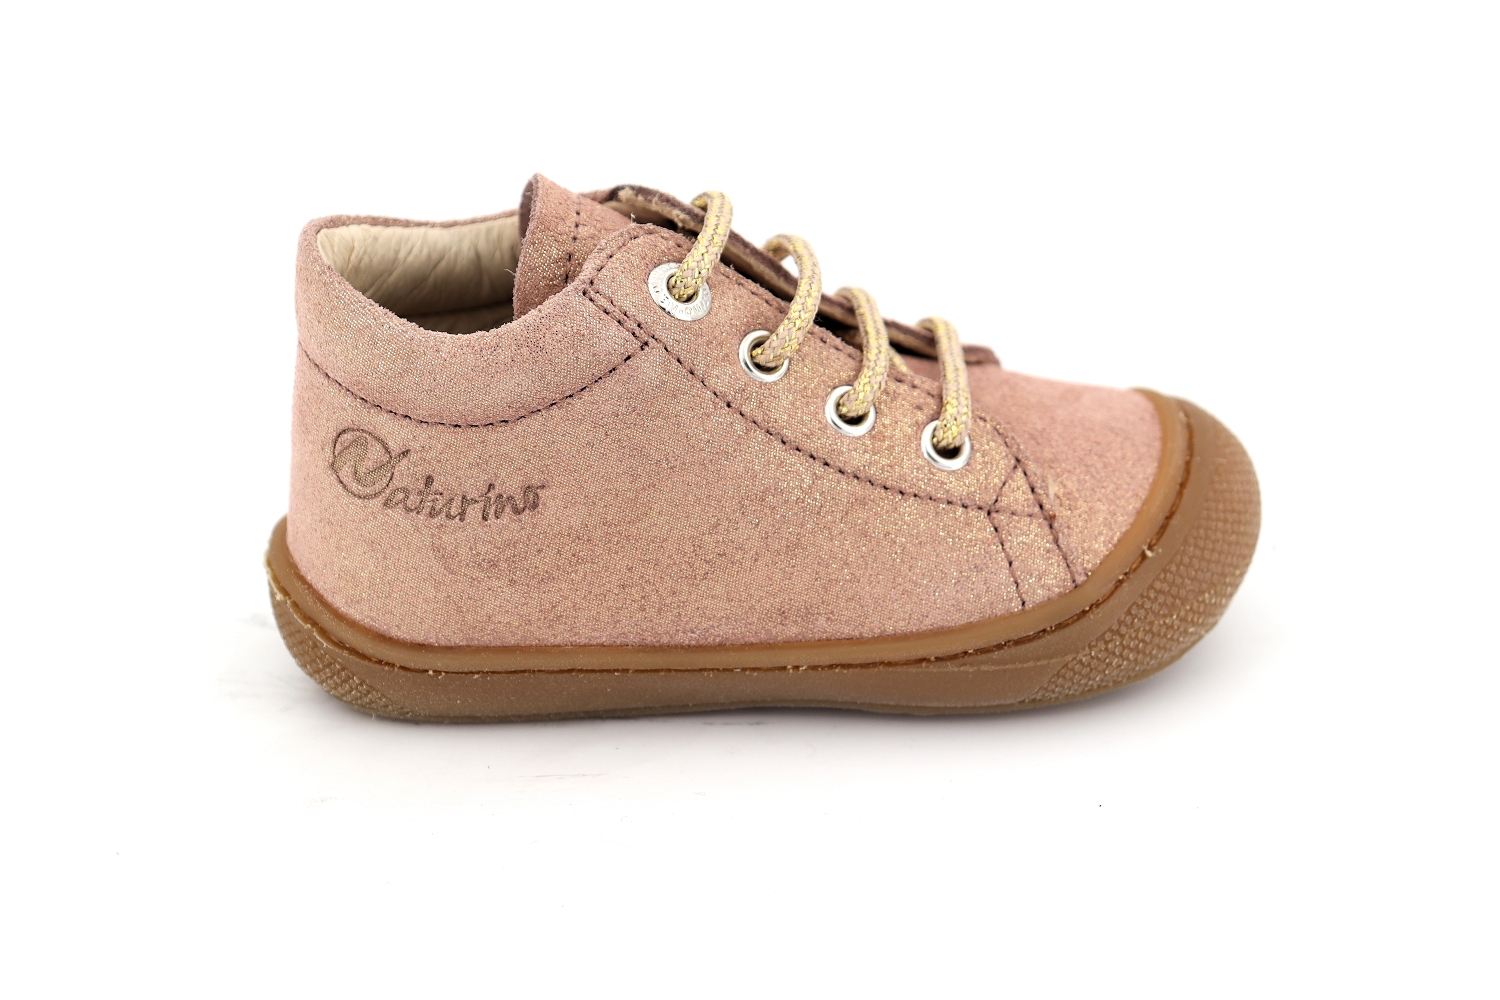 Chaussures à lacets, Naturino, Rose